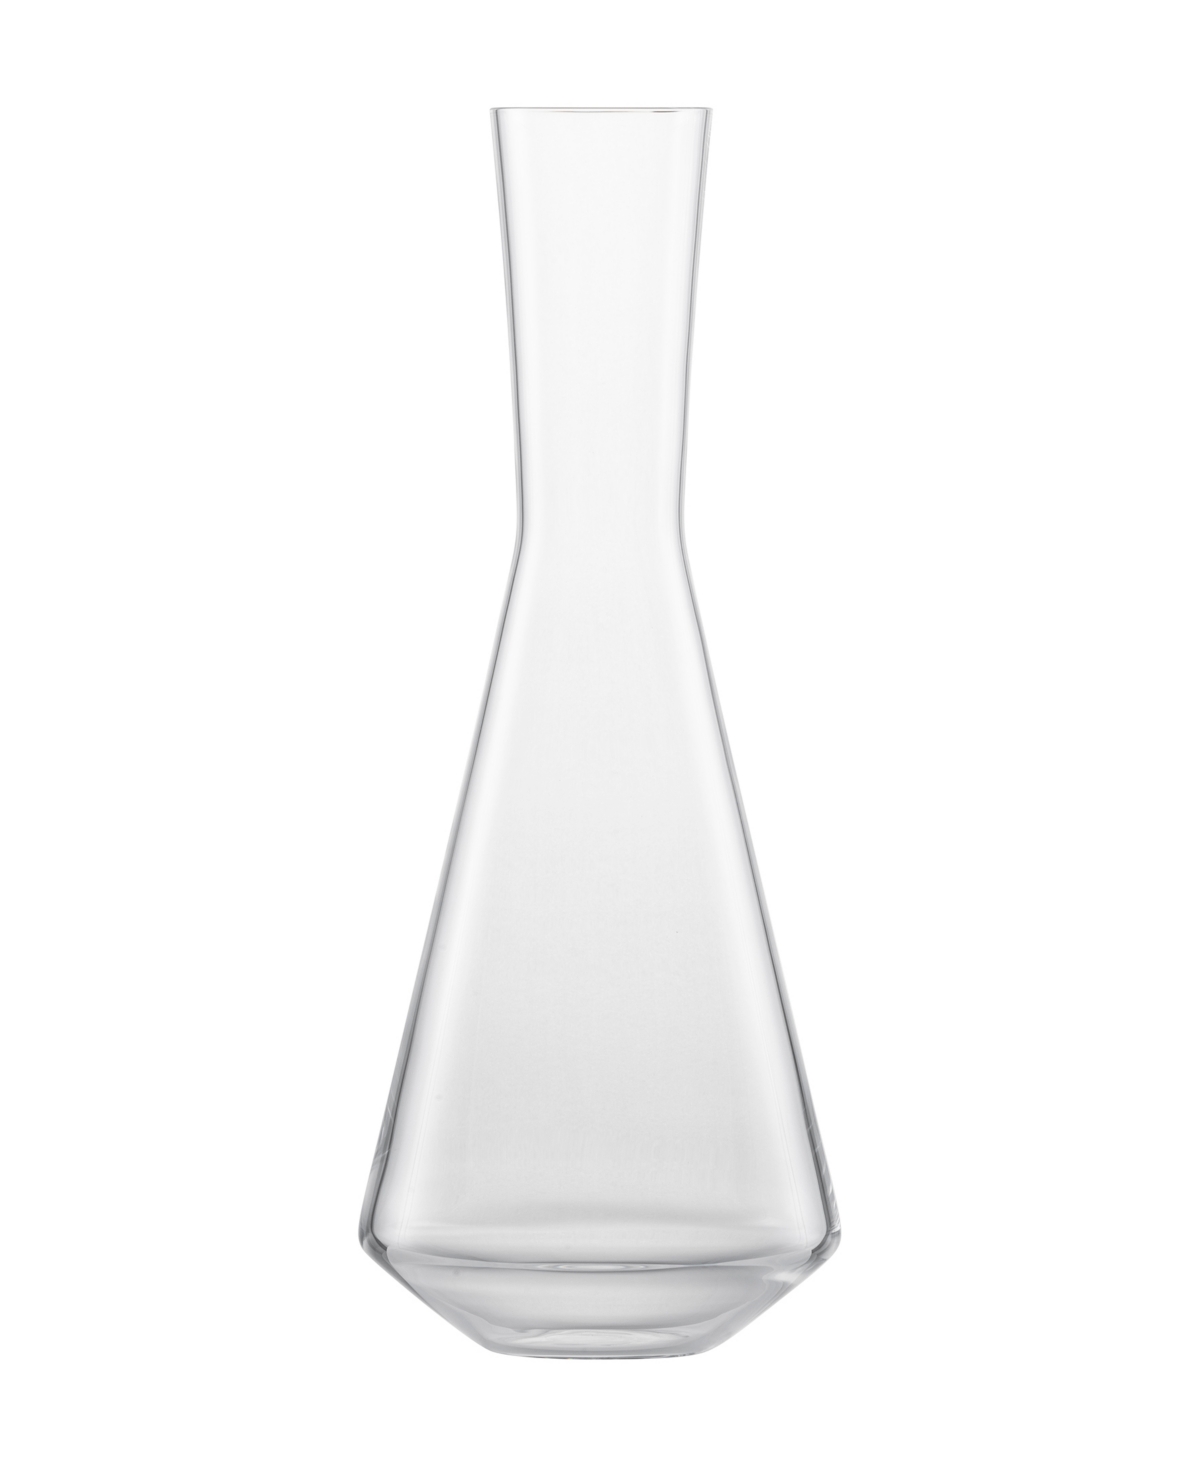 Zwiesel Glas Pure Wine Decanter 25.3 oz In Clear